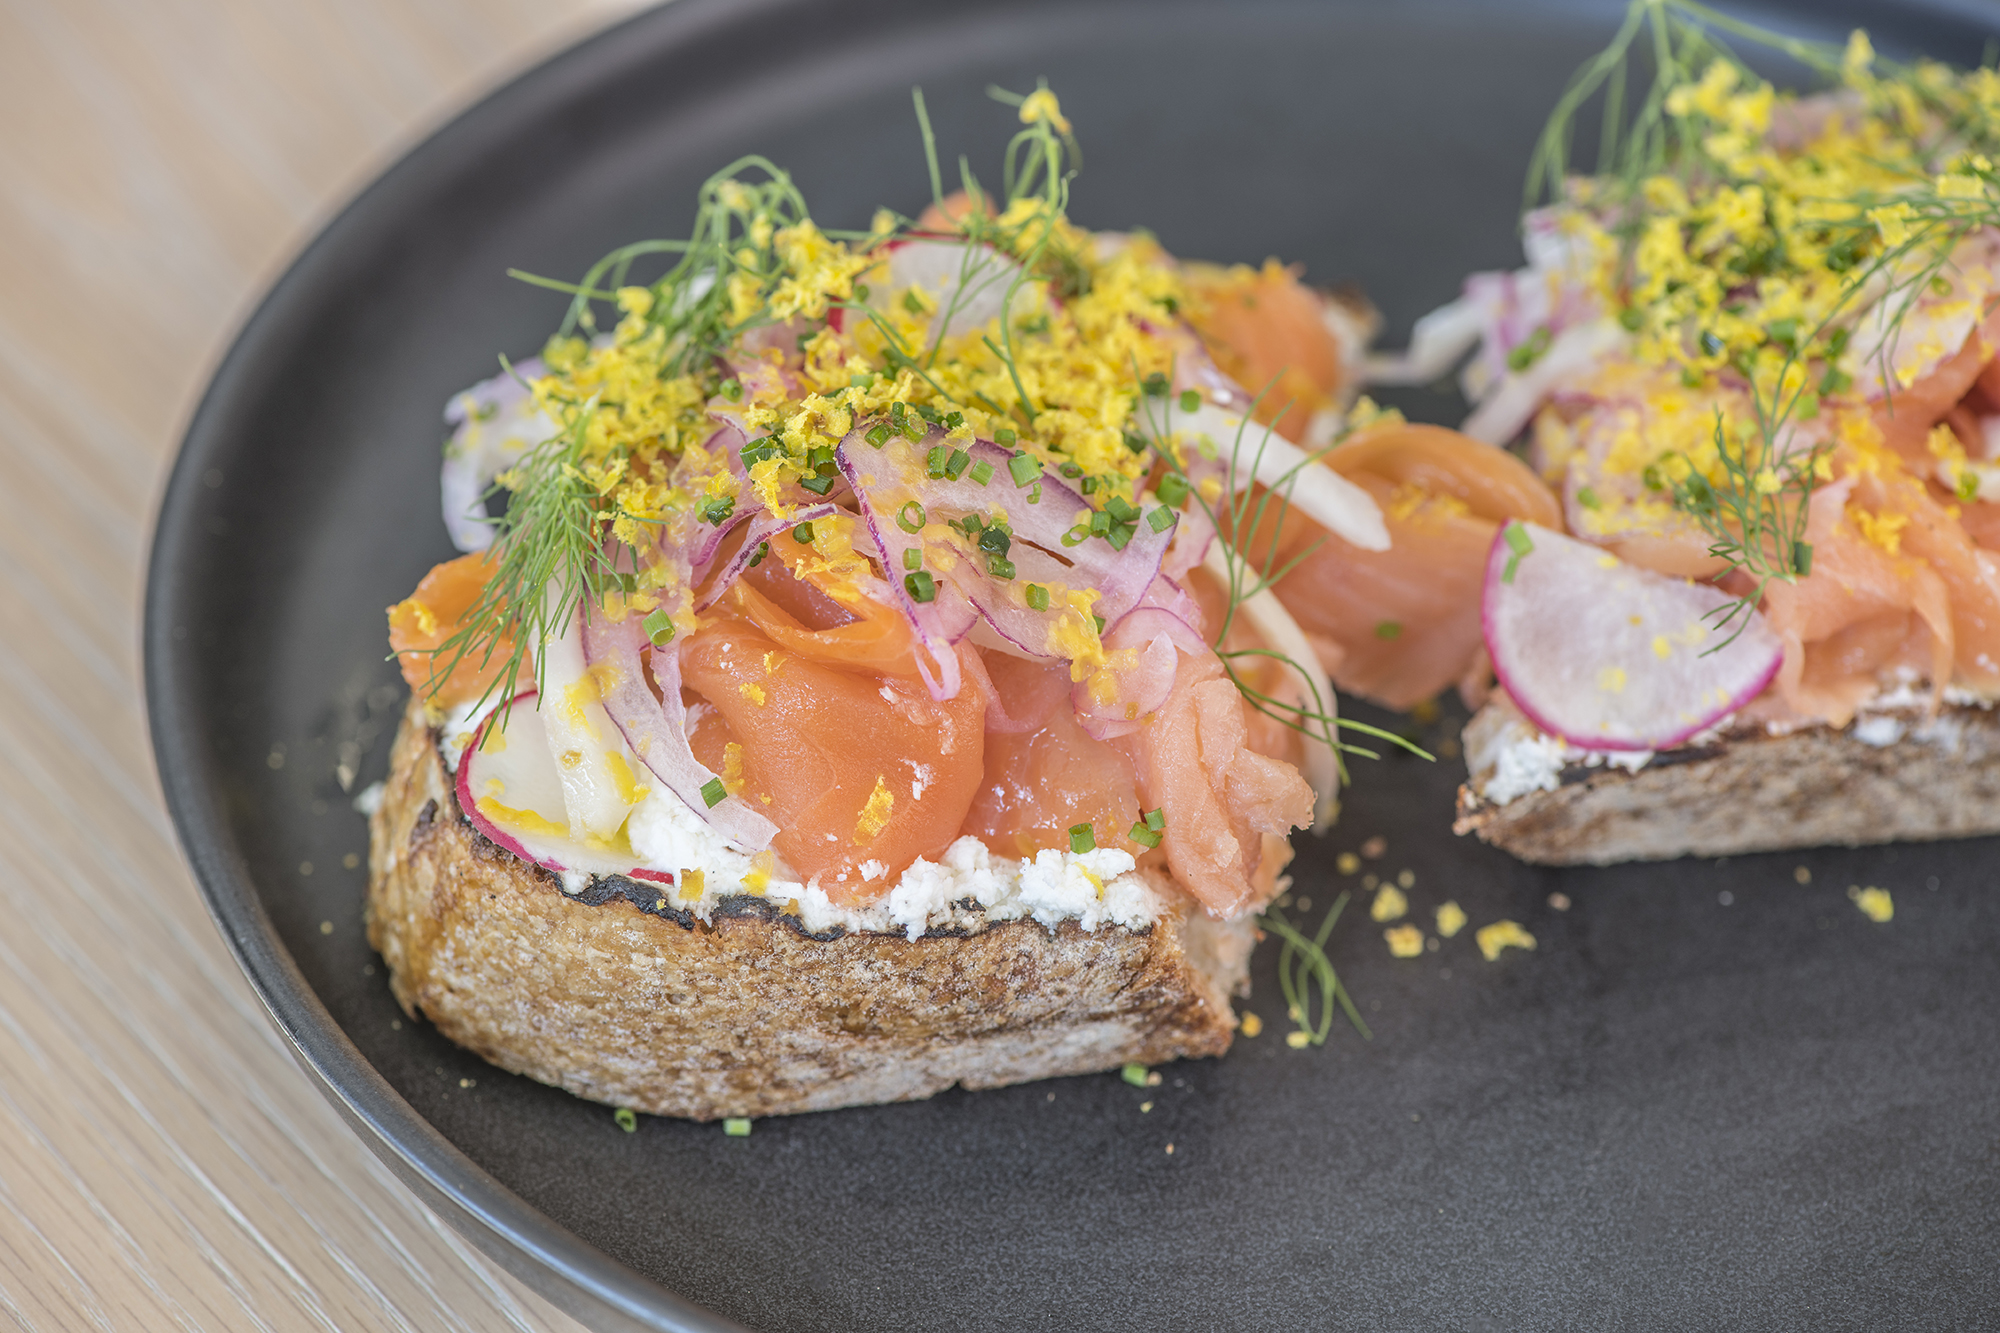  Smoked salmon tartine with fromage blanc, red onion, pickled kohlrabi, cured yolk, dill at  Fausto at the CAC . || Image:  Twin Spire Photography  - Published: 10.2.2019 